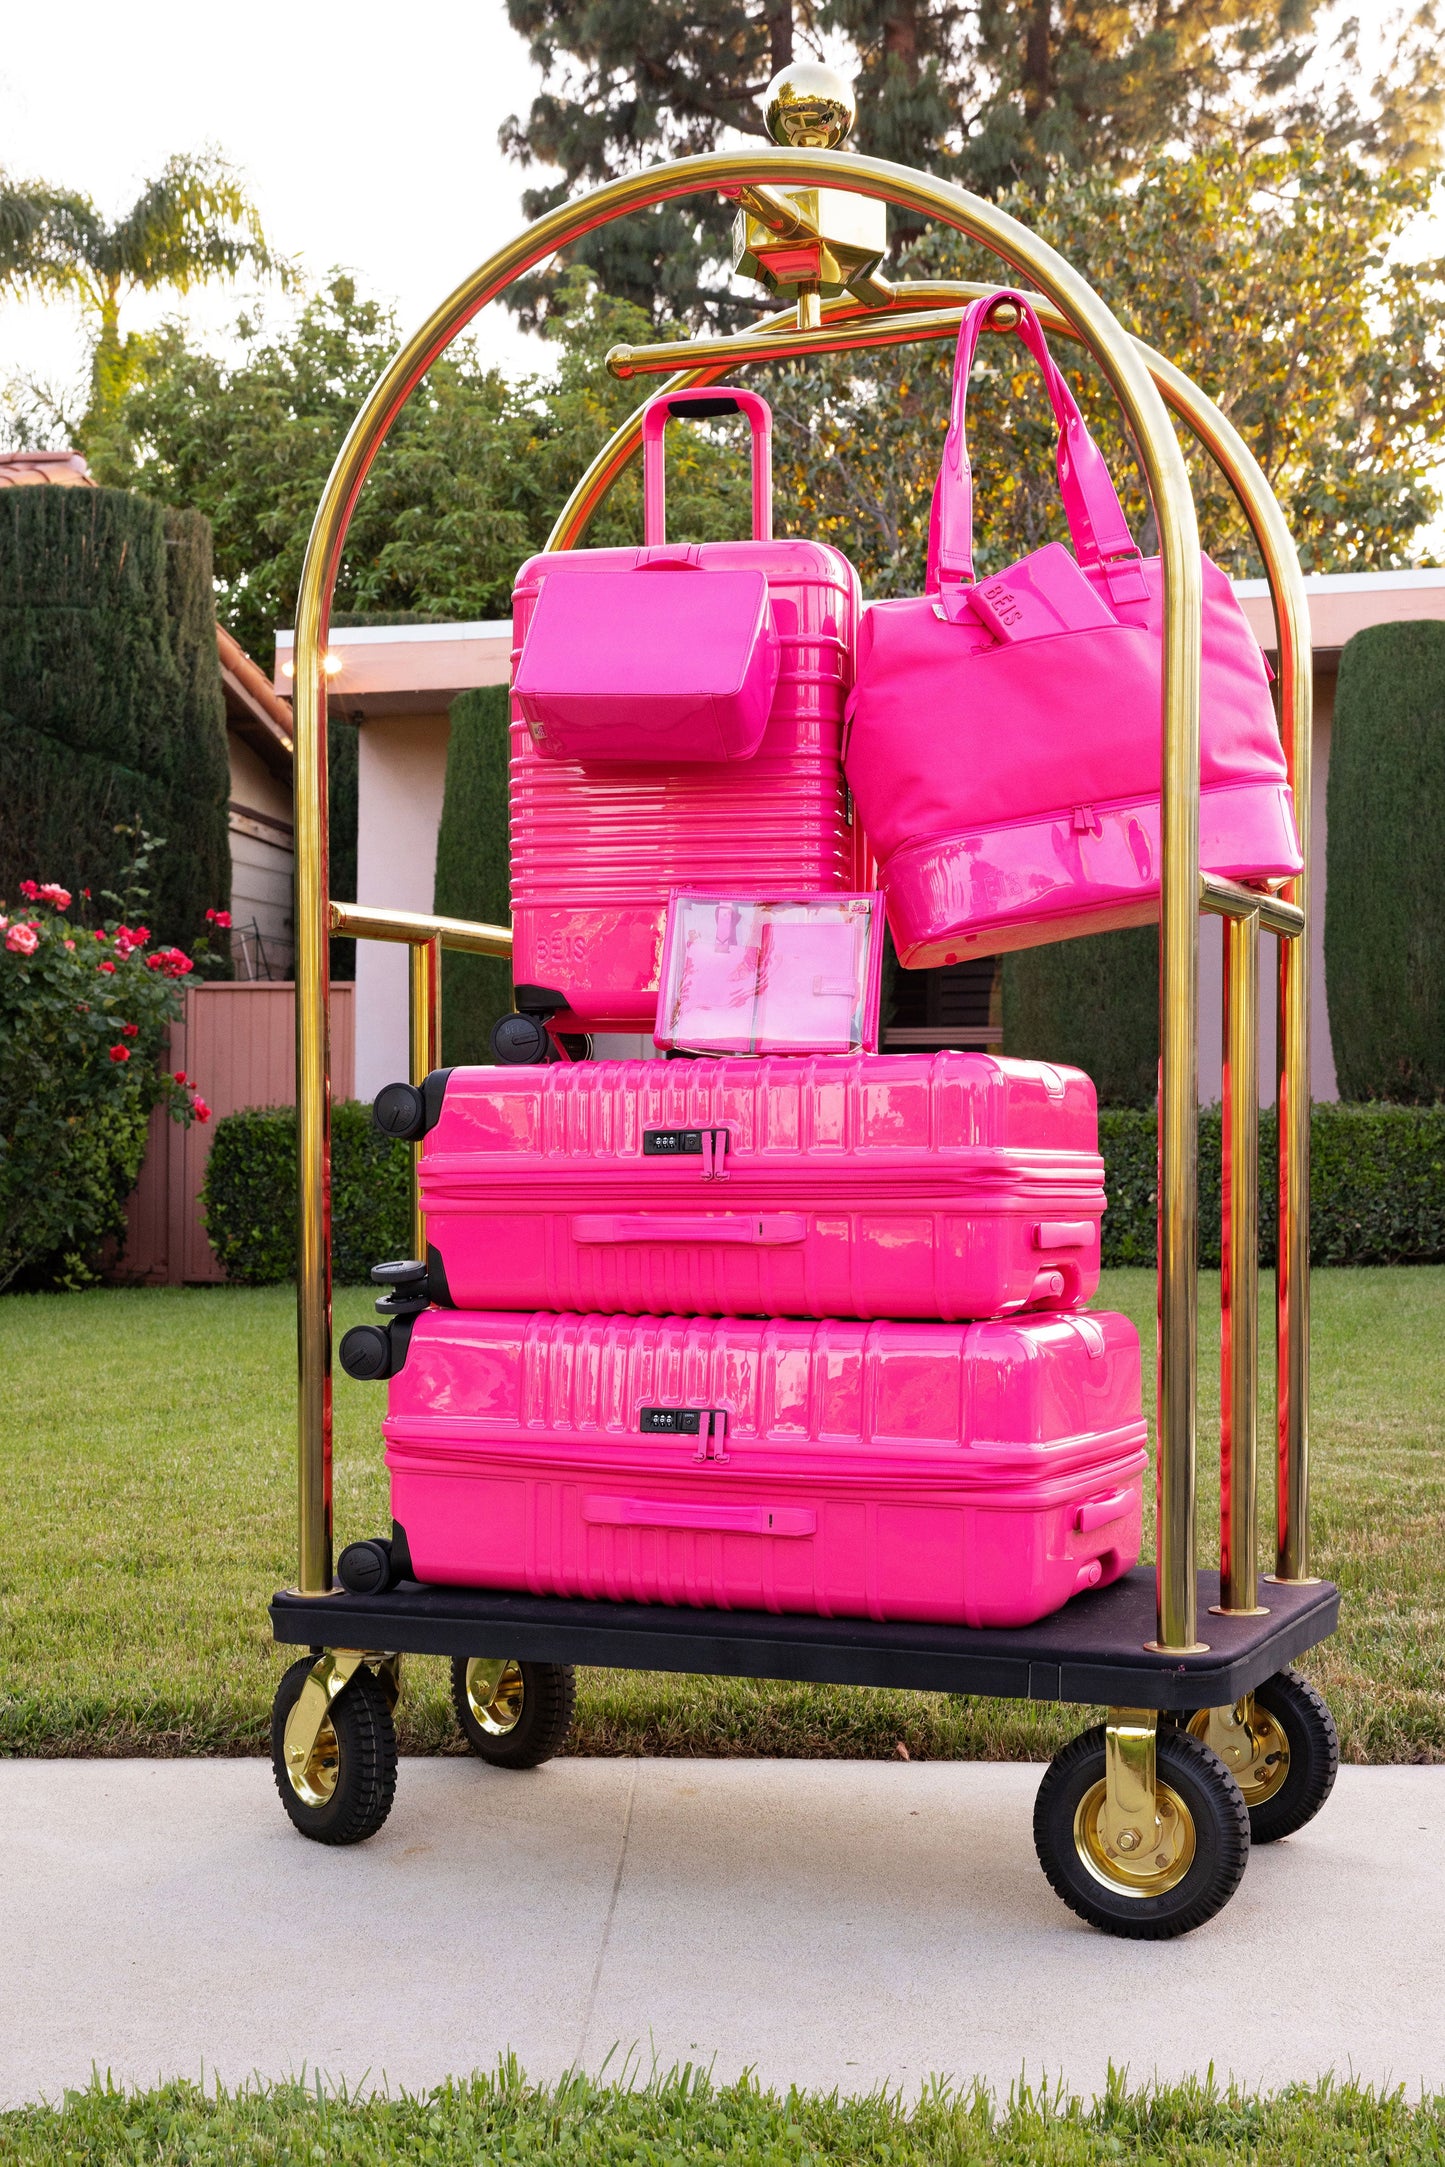 The Large Check-In Roller in Barbie™ Pink